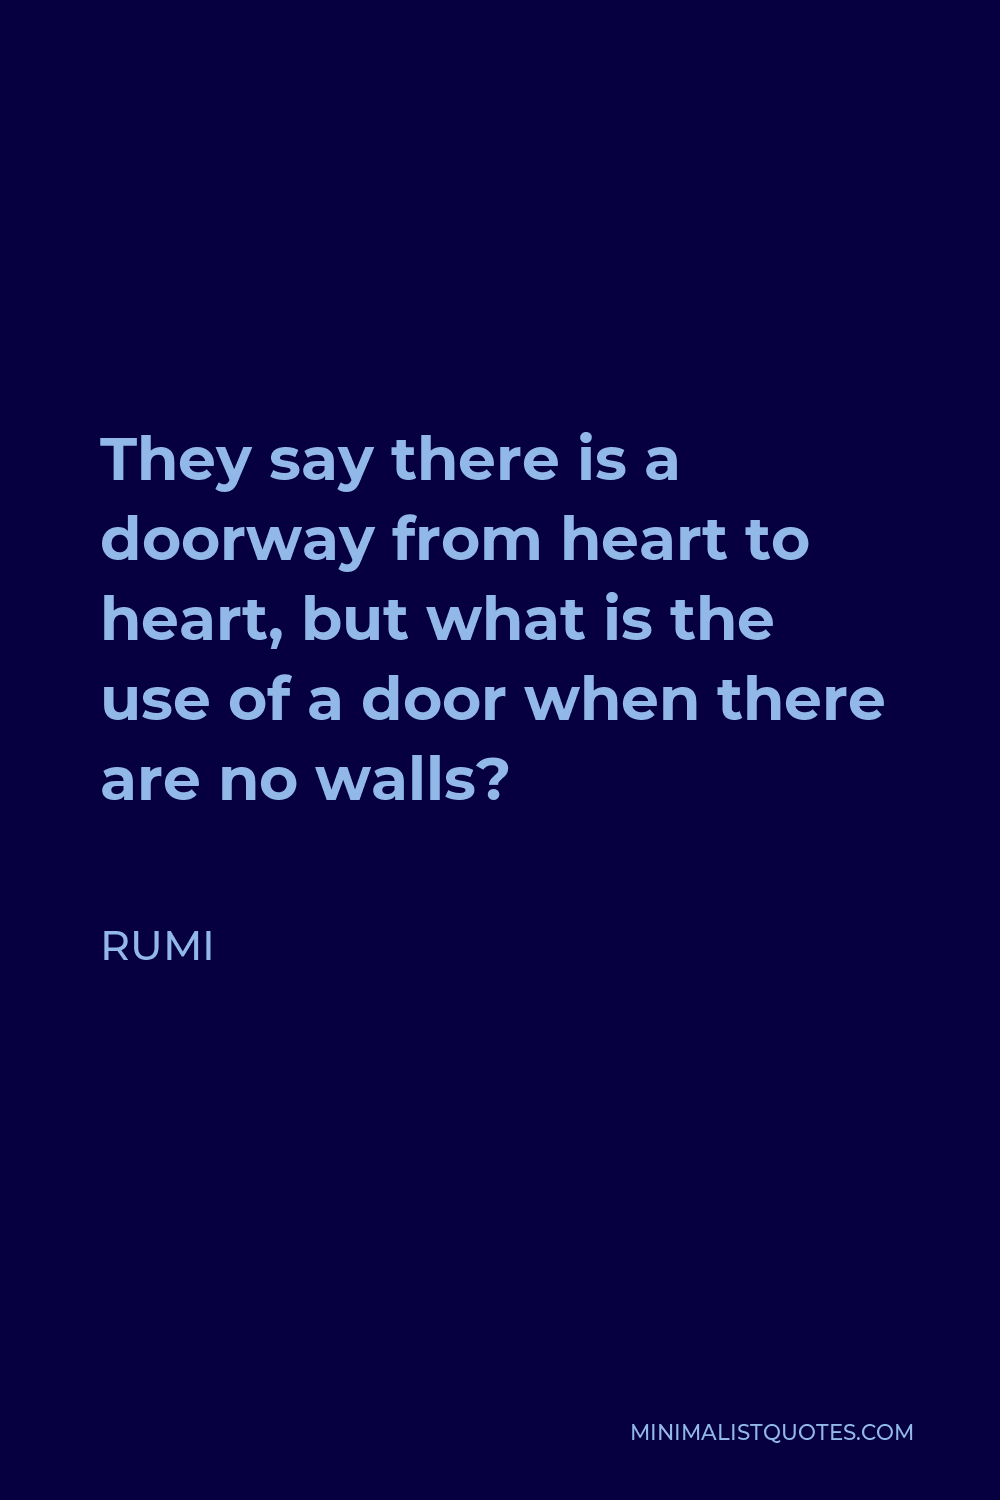 Rumi Quote - They say there is a doorway from heart to heart, but what is the use of a door when there are no walls?